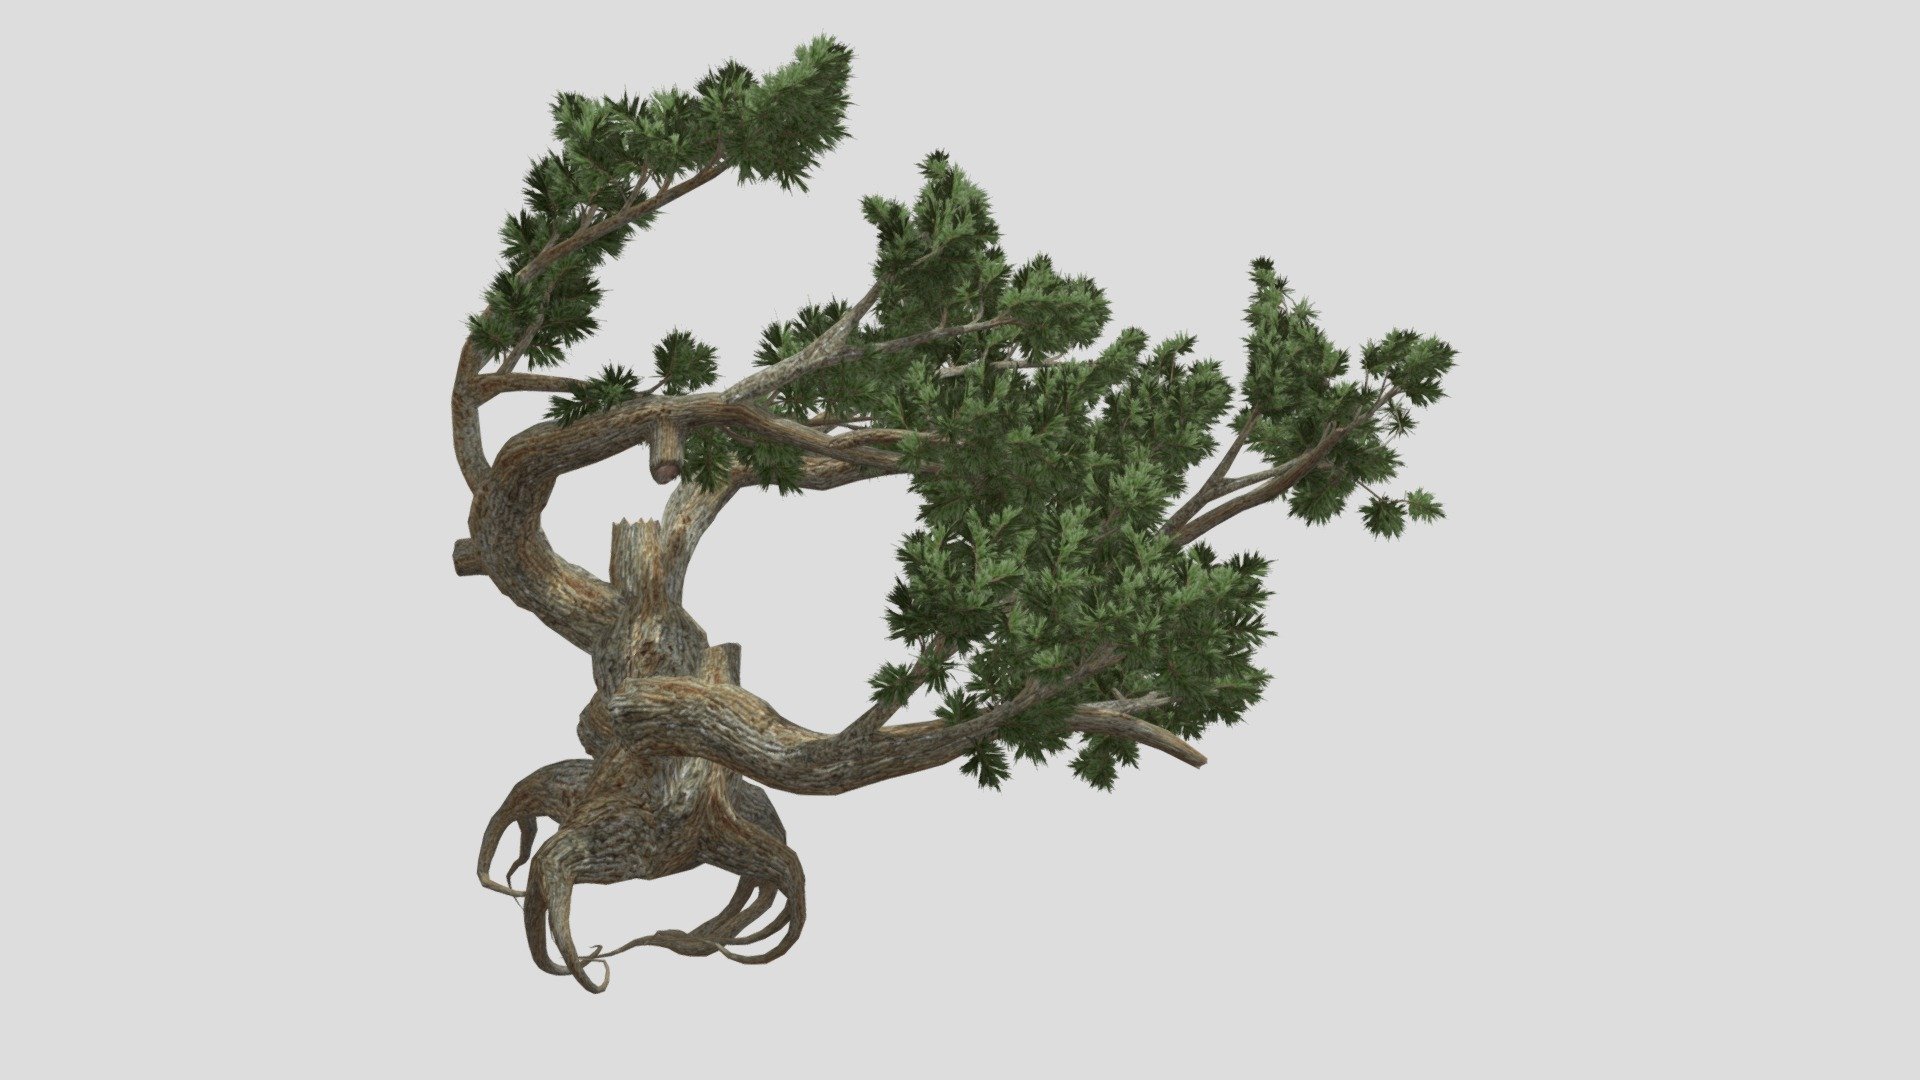 Jeffrey Pine. Yellow and black are North American pine. It is primarily found in California, but also in westernmost Nevada, southwestern Oregon, and northern Baja California 3d model